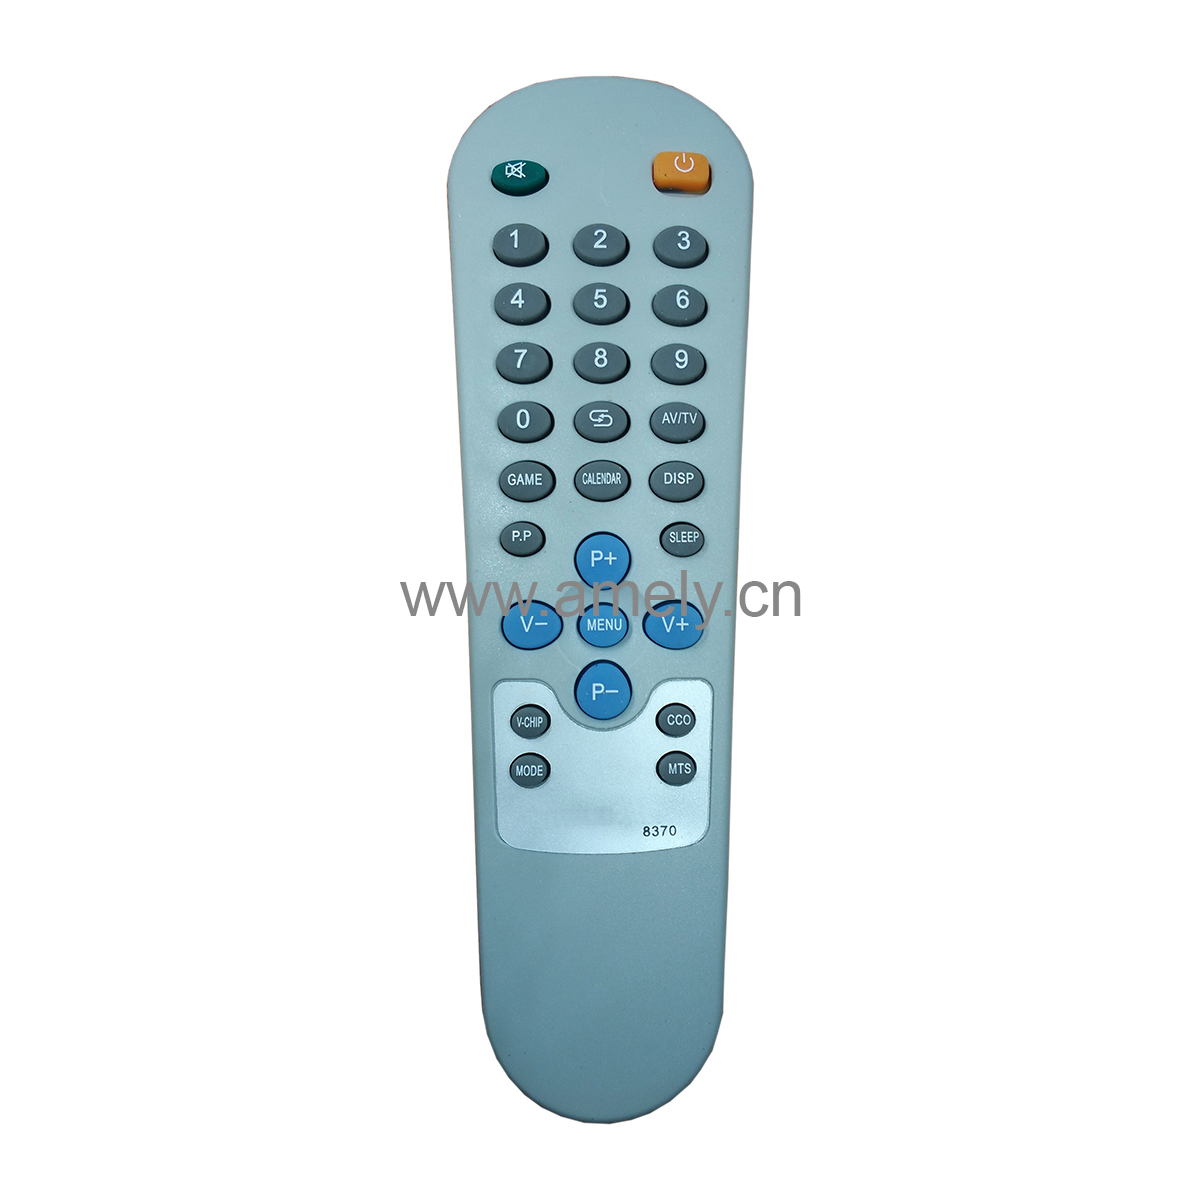 clergyman Petrify suit US$ 1.80 - 8370 Use for TELSTAR TV remote control - China Aemly Electronic  Co.,Ltd